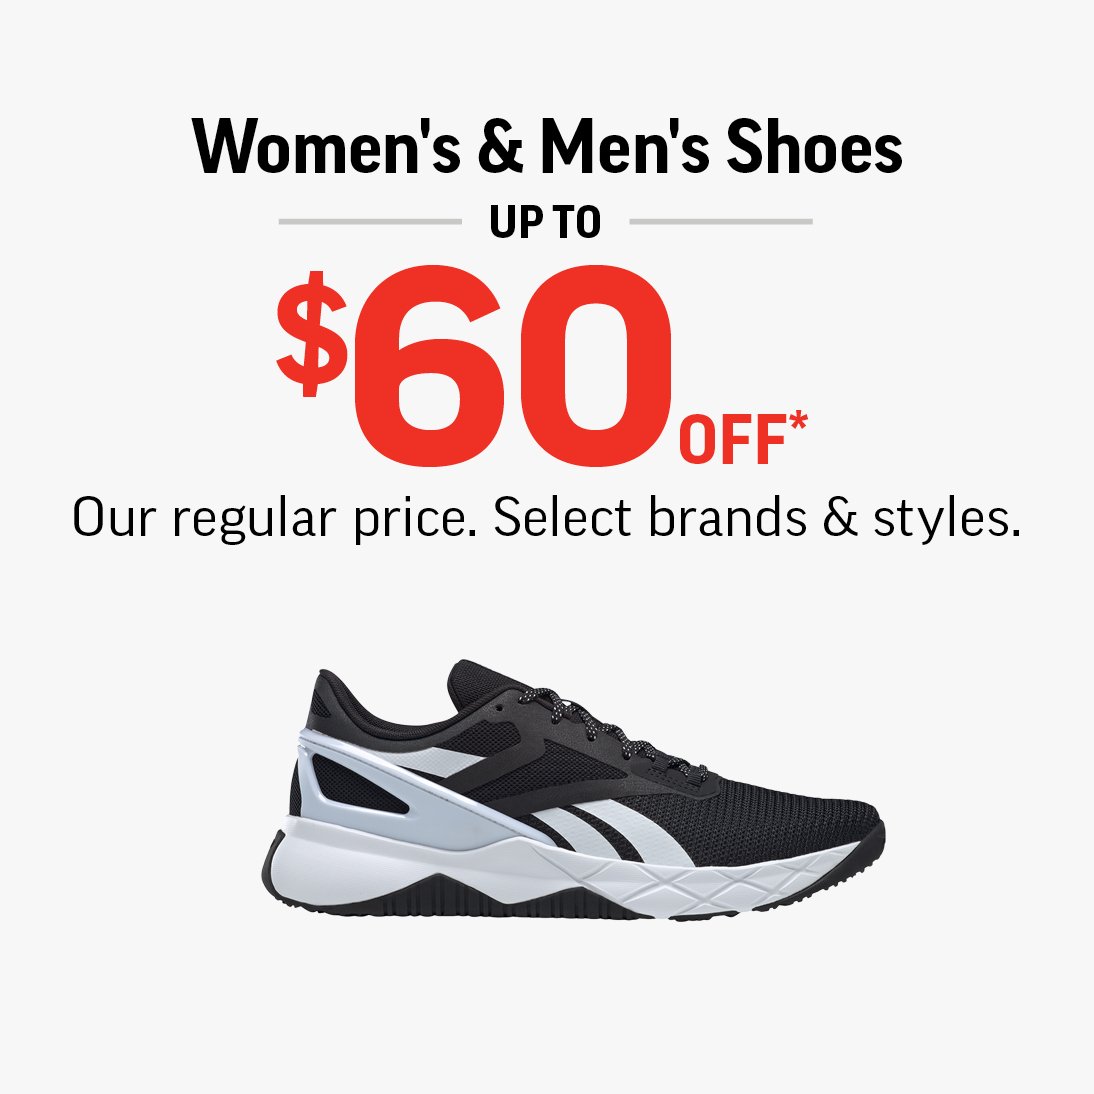 WOMEN'S & MEN'S SHOES UP TO $60 OFF